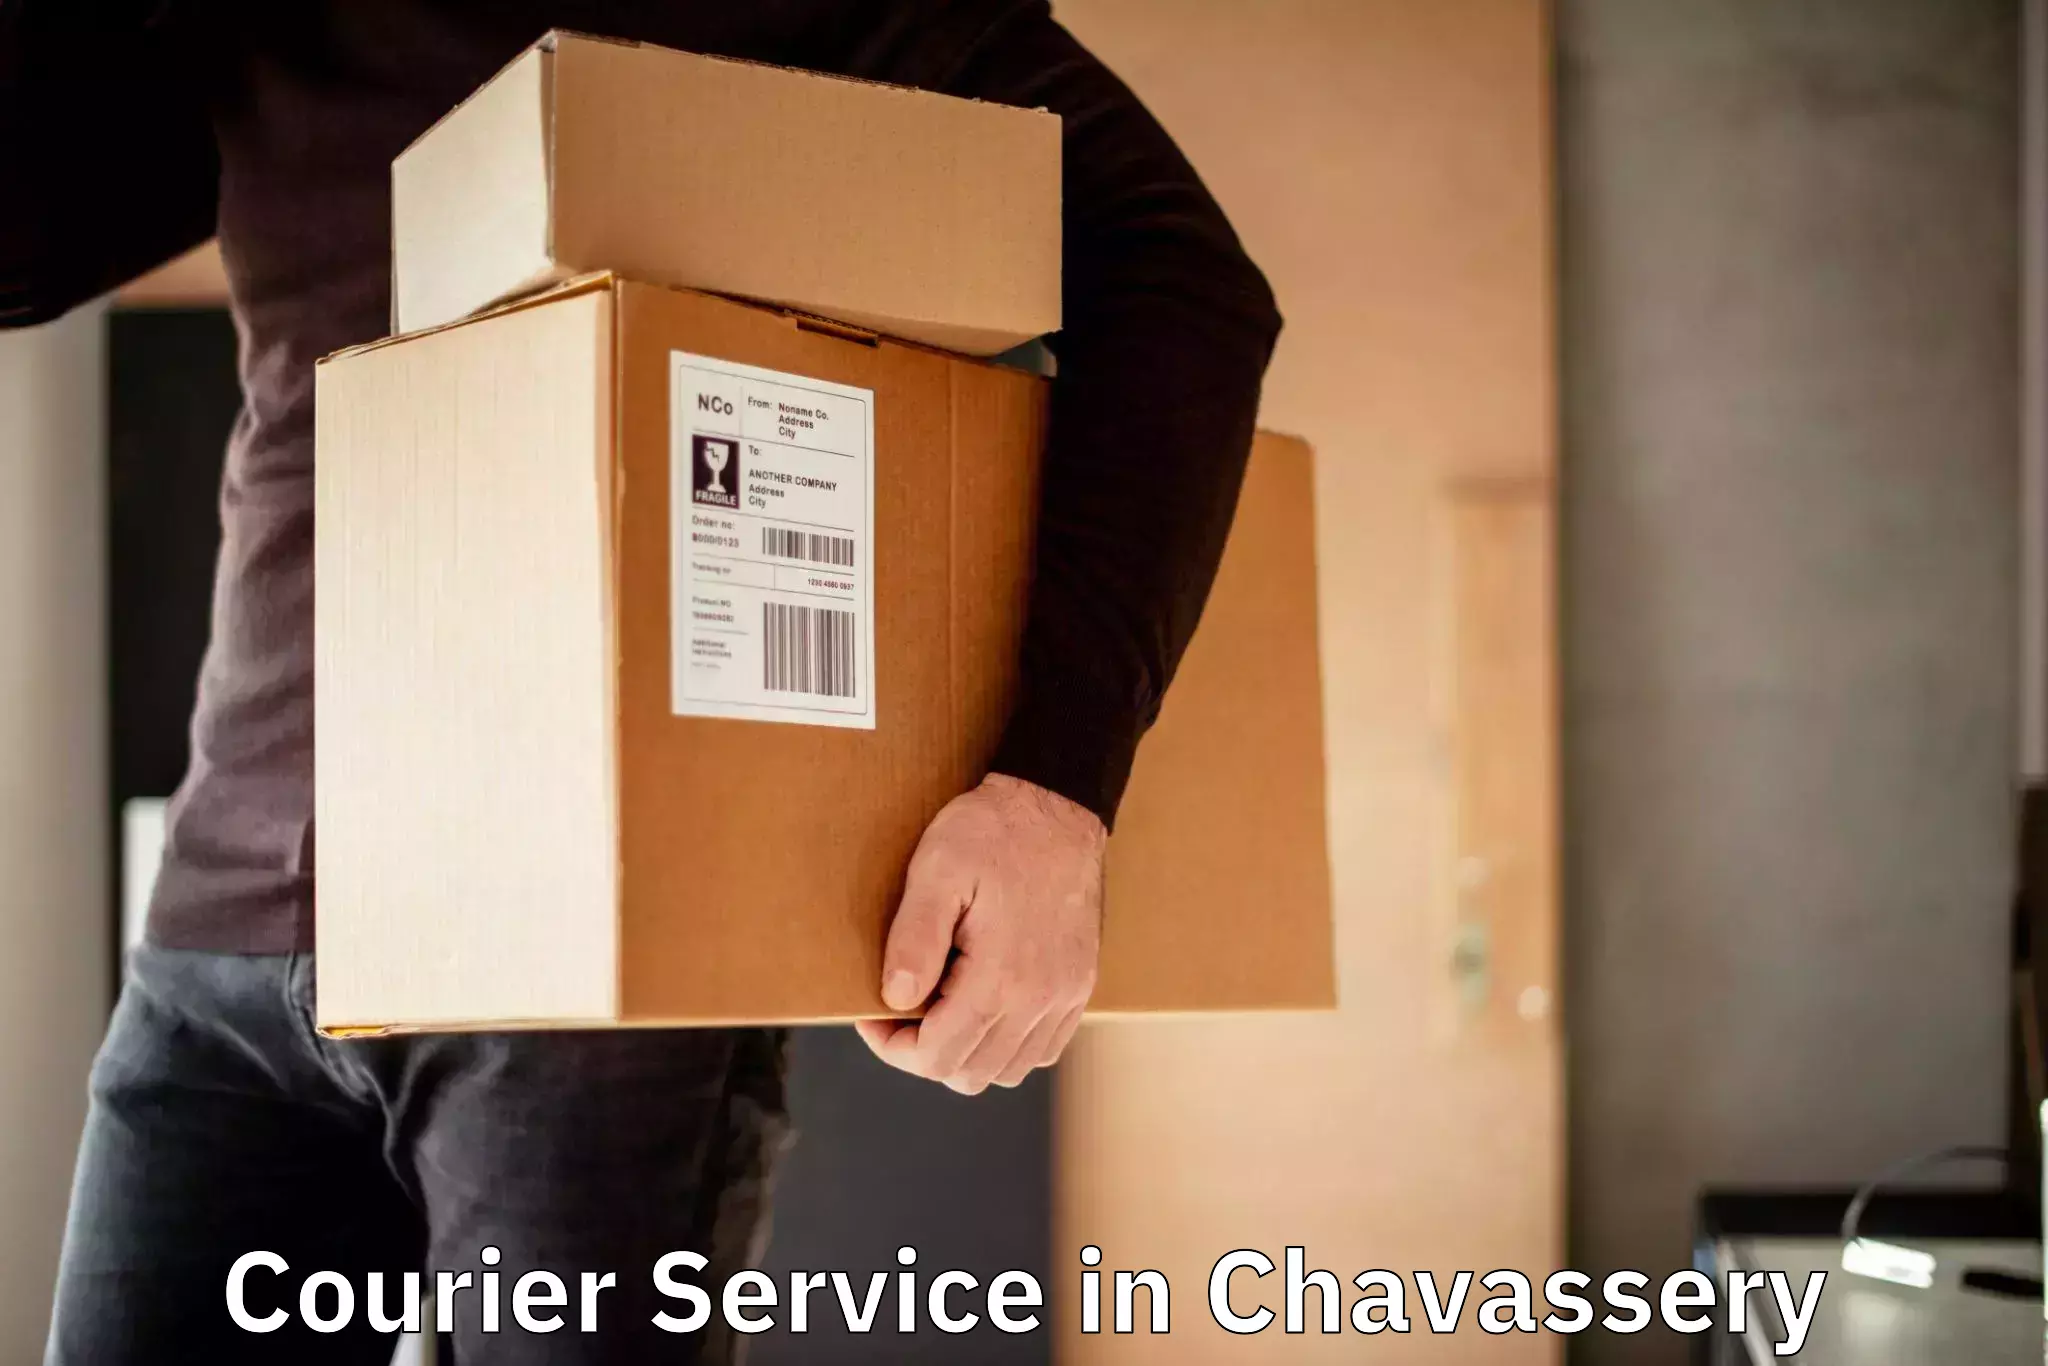 Diverse delivery methods in Chavassery